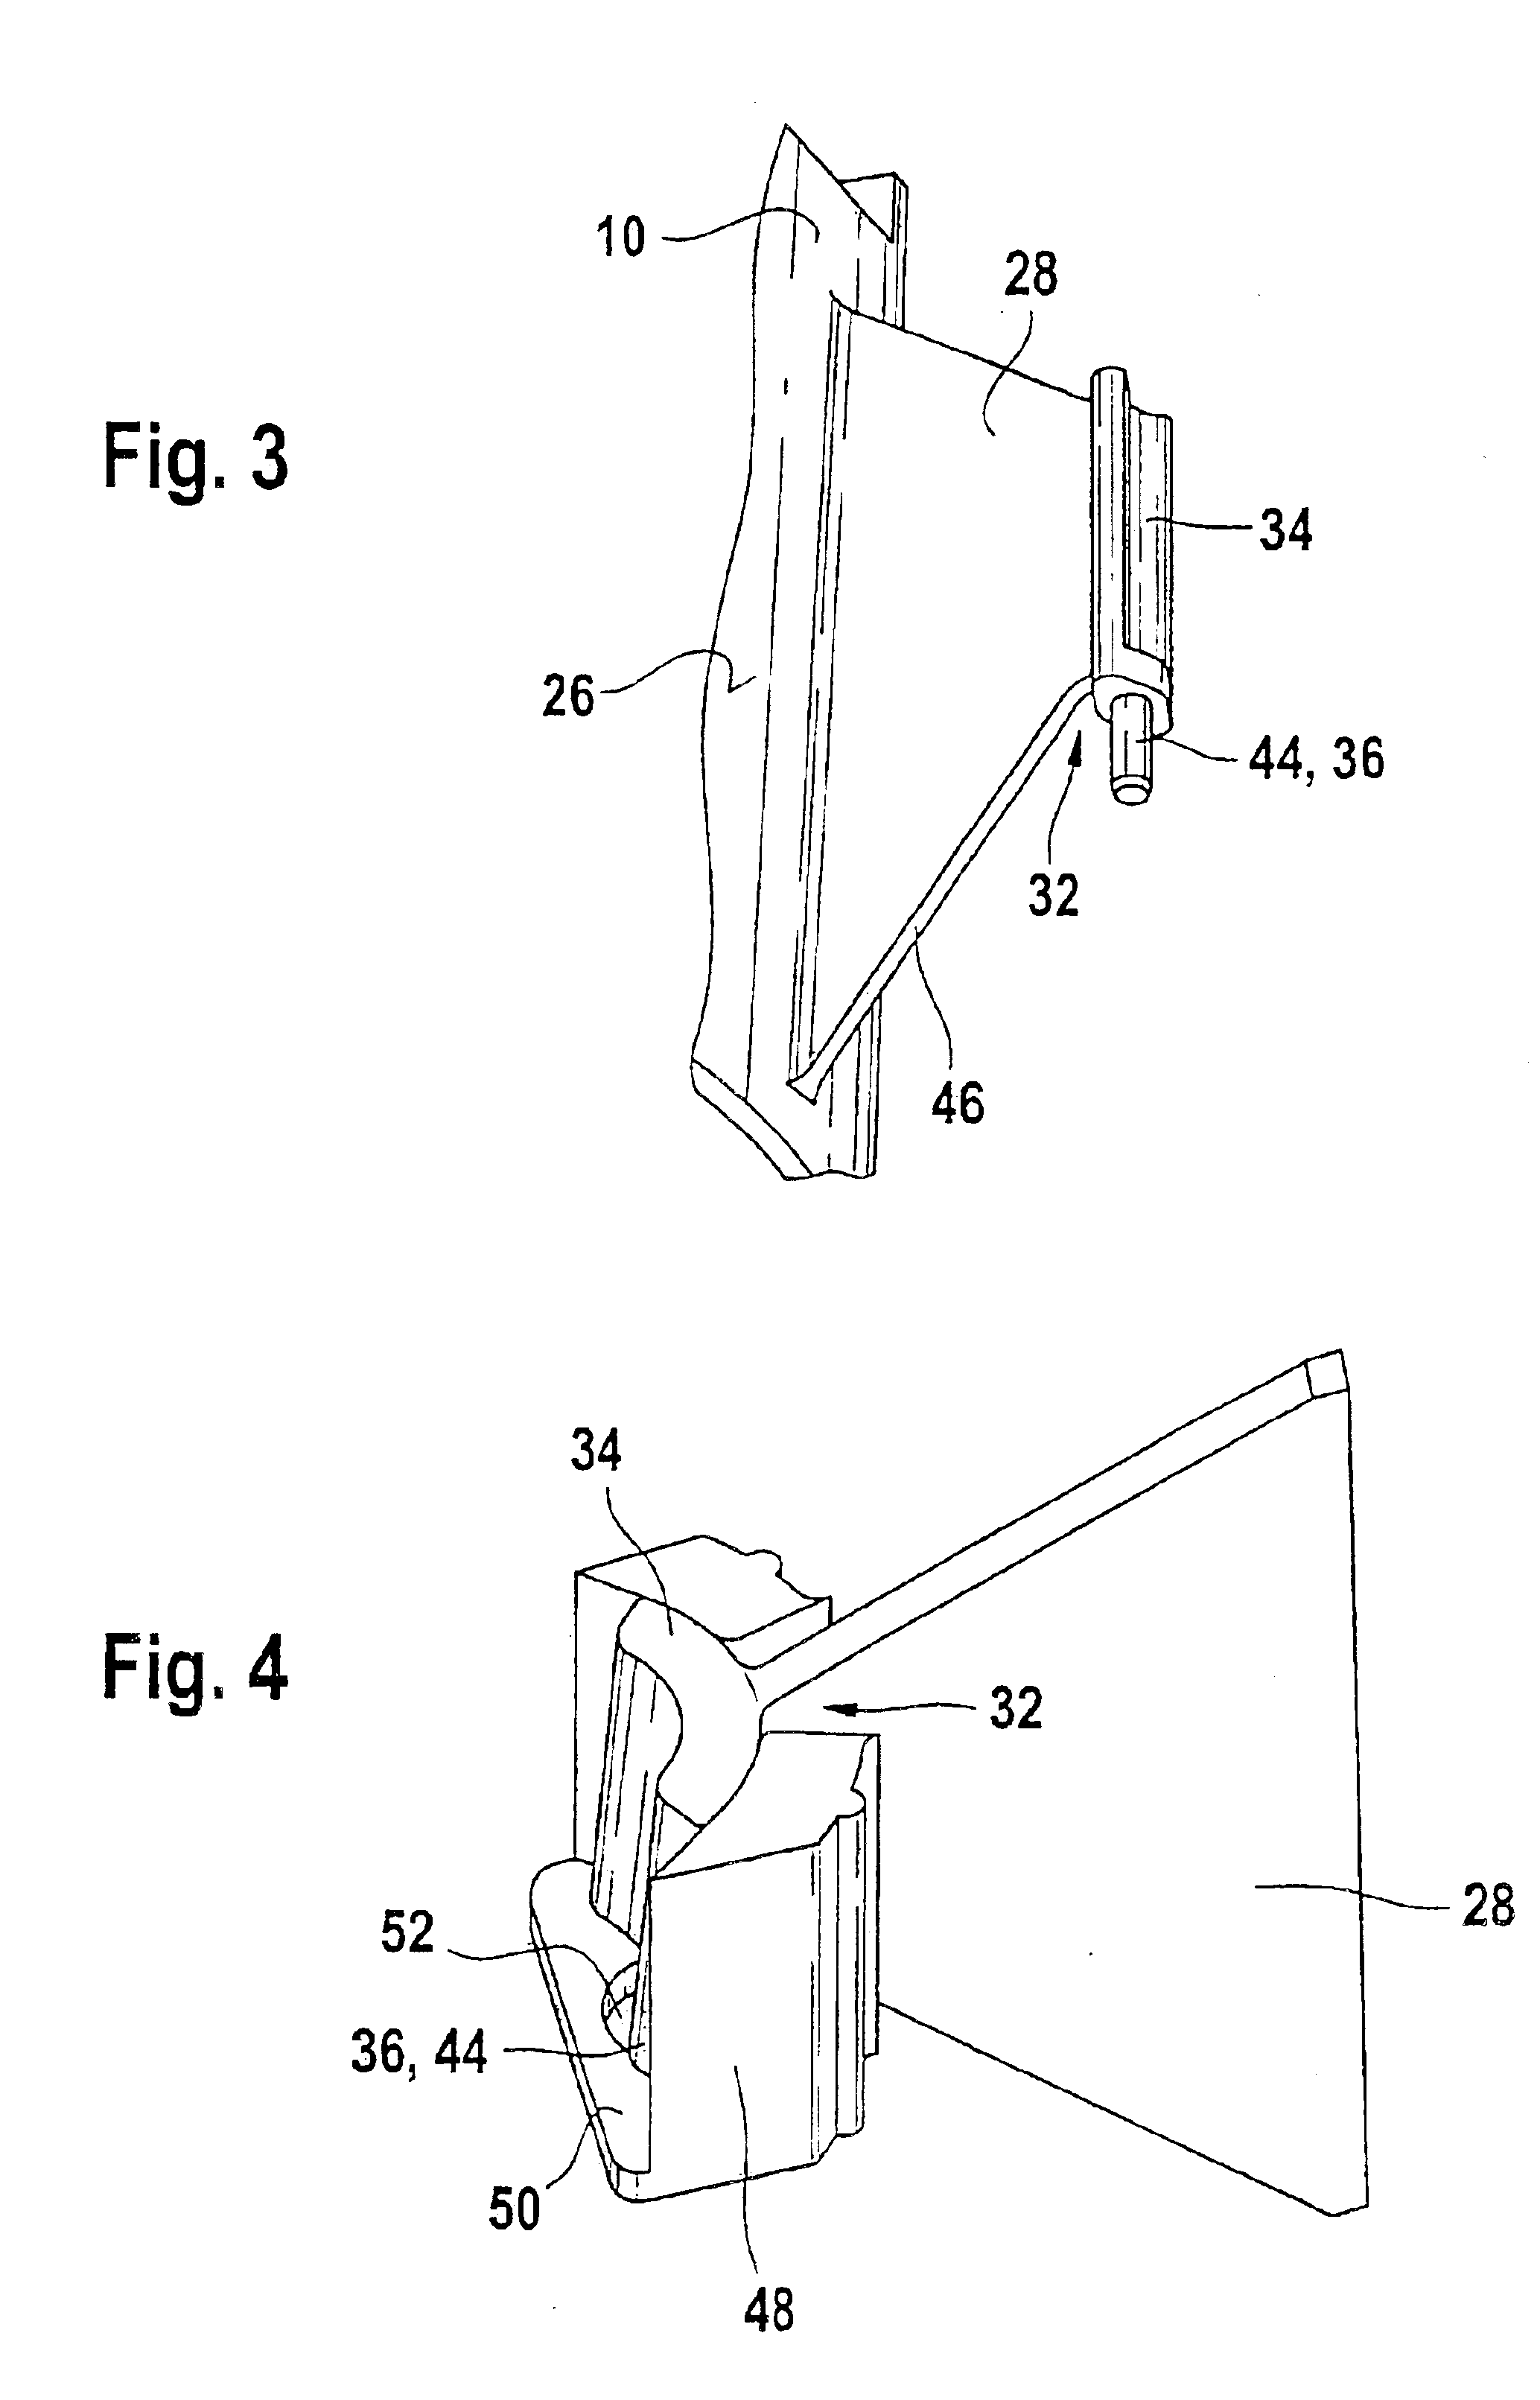 Anti-vibrational holding device for an electric motor